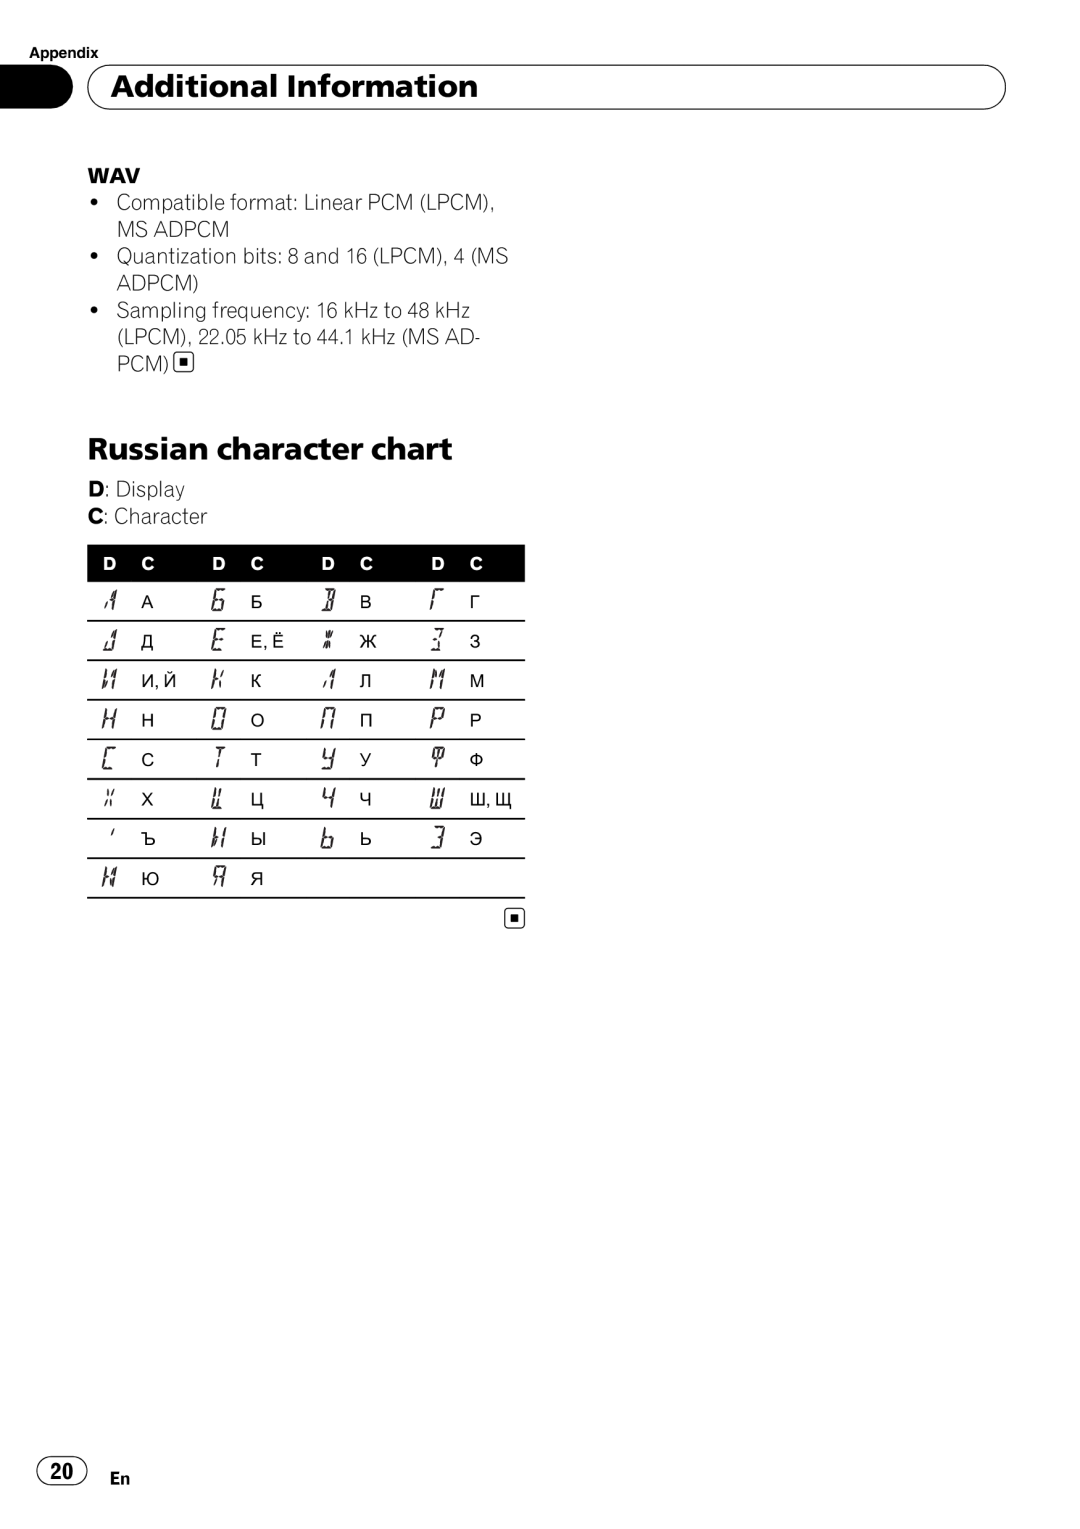 Pioneer DEH-200MP Russian character chart, Additional Information, WAV Compatible format Linear PCM LPCM MS ADPCM 